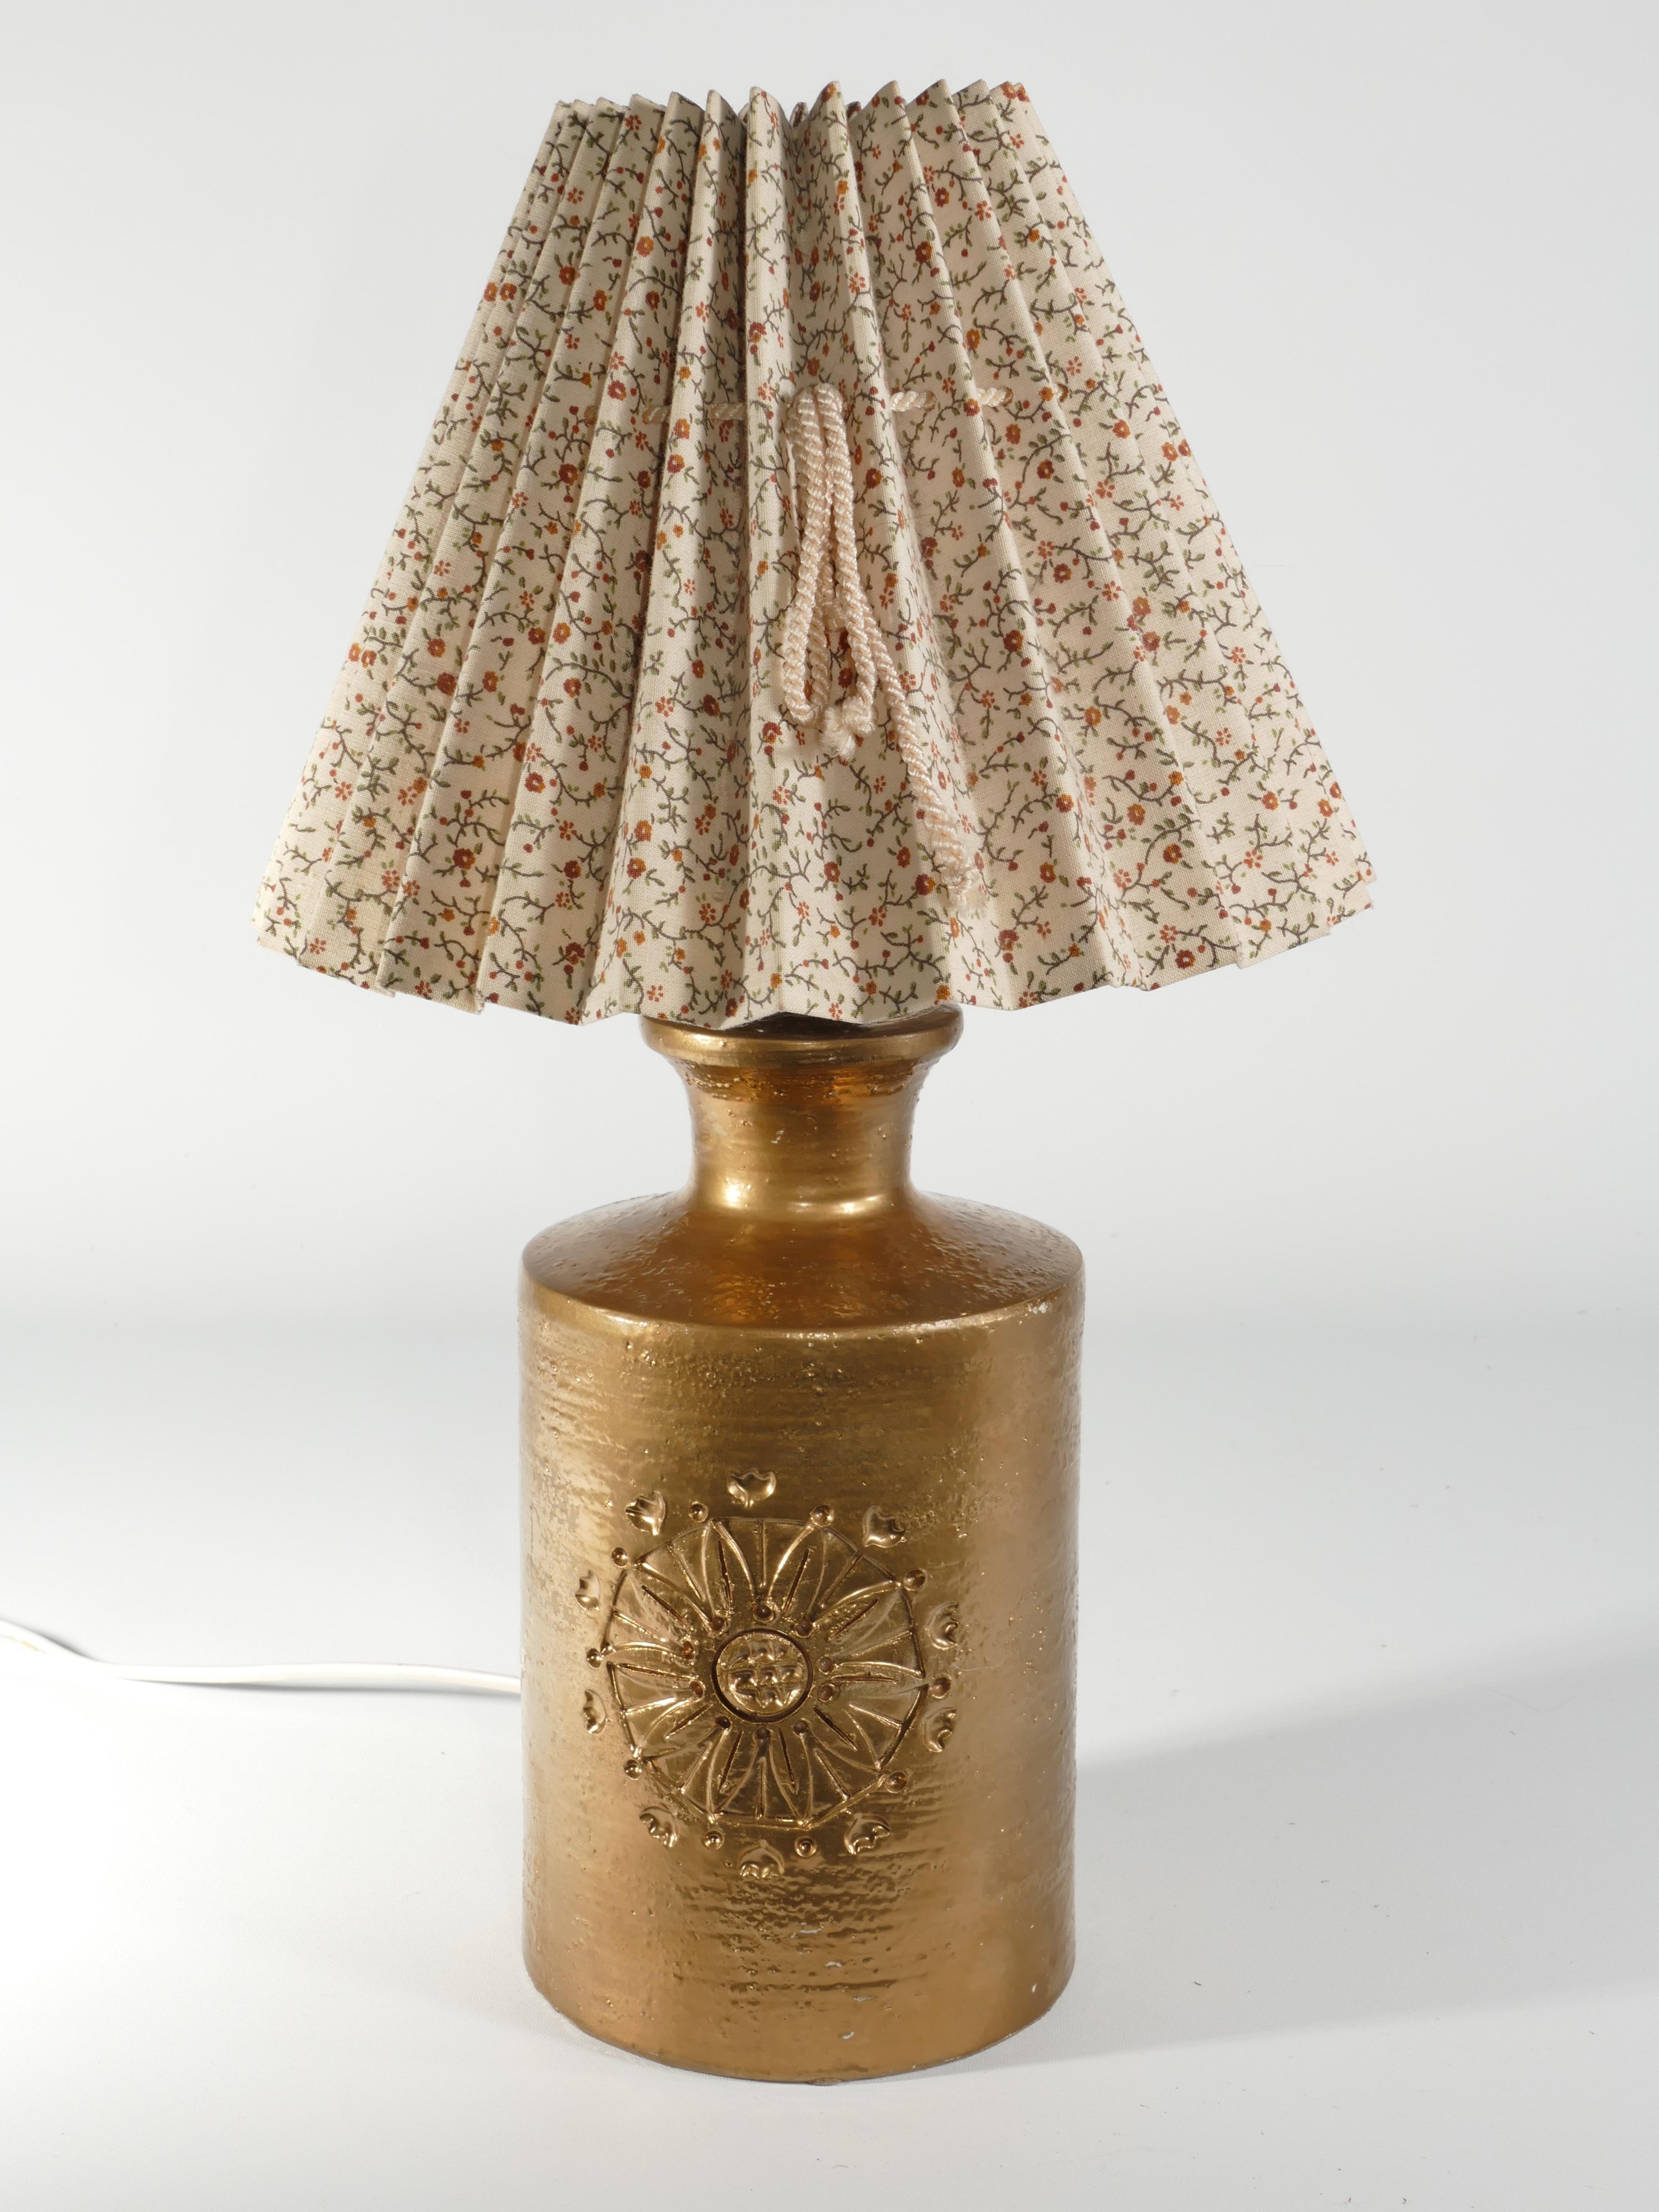 A ceramic table lamp by Bitossi for Bergboms, featuring a luxurious 22-Karat Gold Glaze.

Presenting a striking table lamp crafted by Bitossi for Bergboms, these pieces showcase exquisite 22-karat gold glazed ceramic adorned with delicate floral